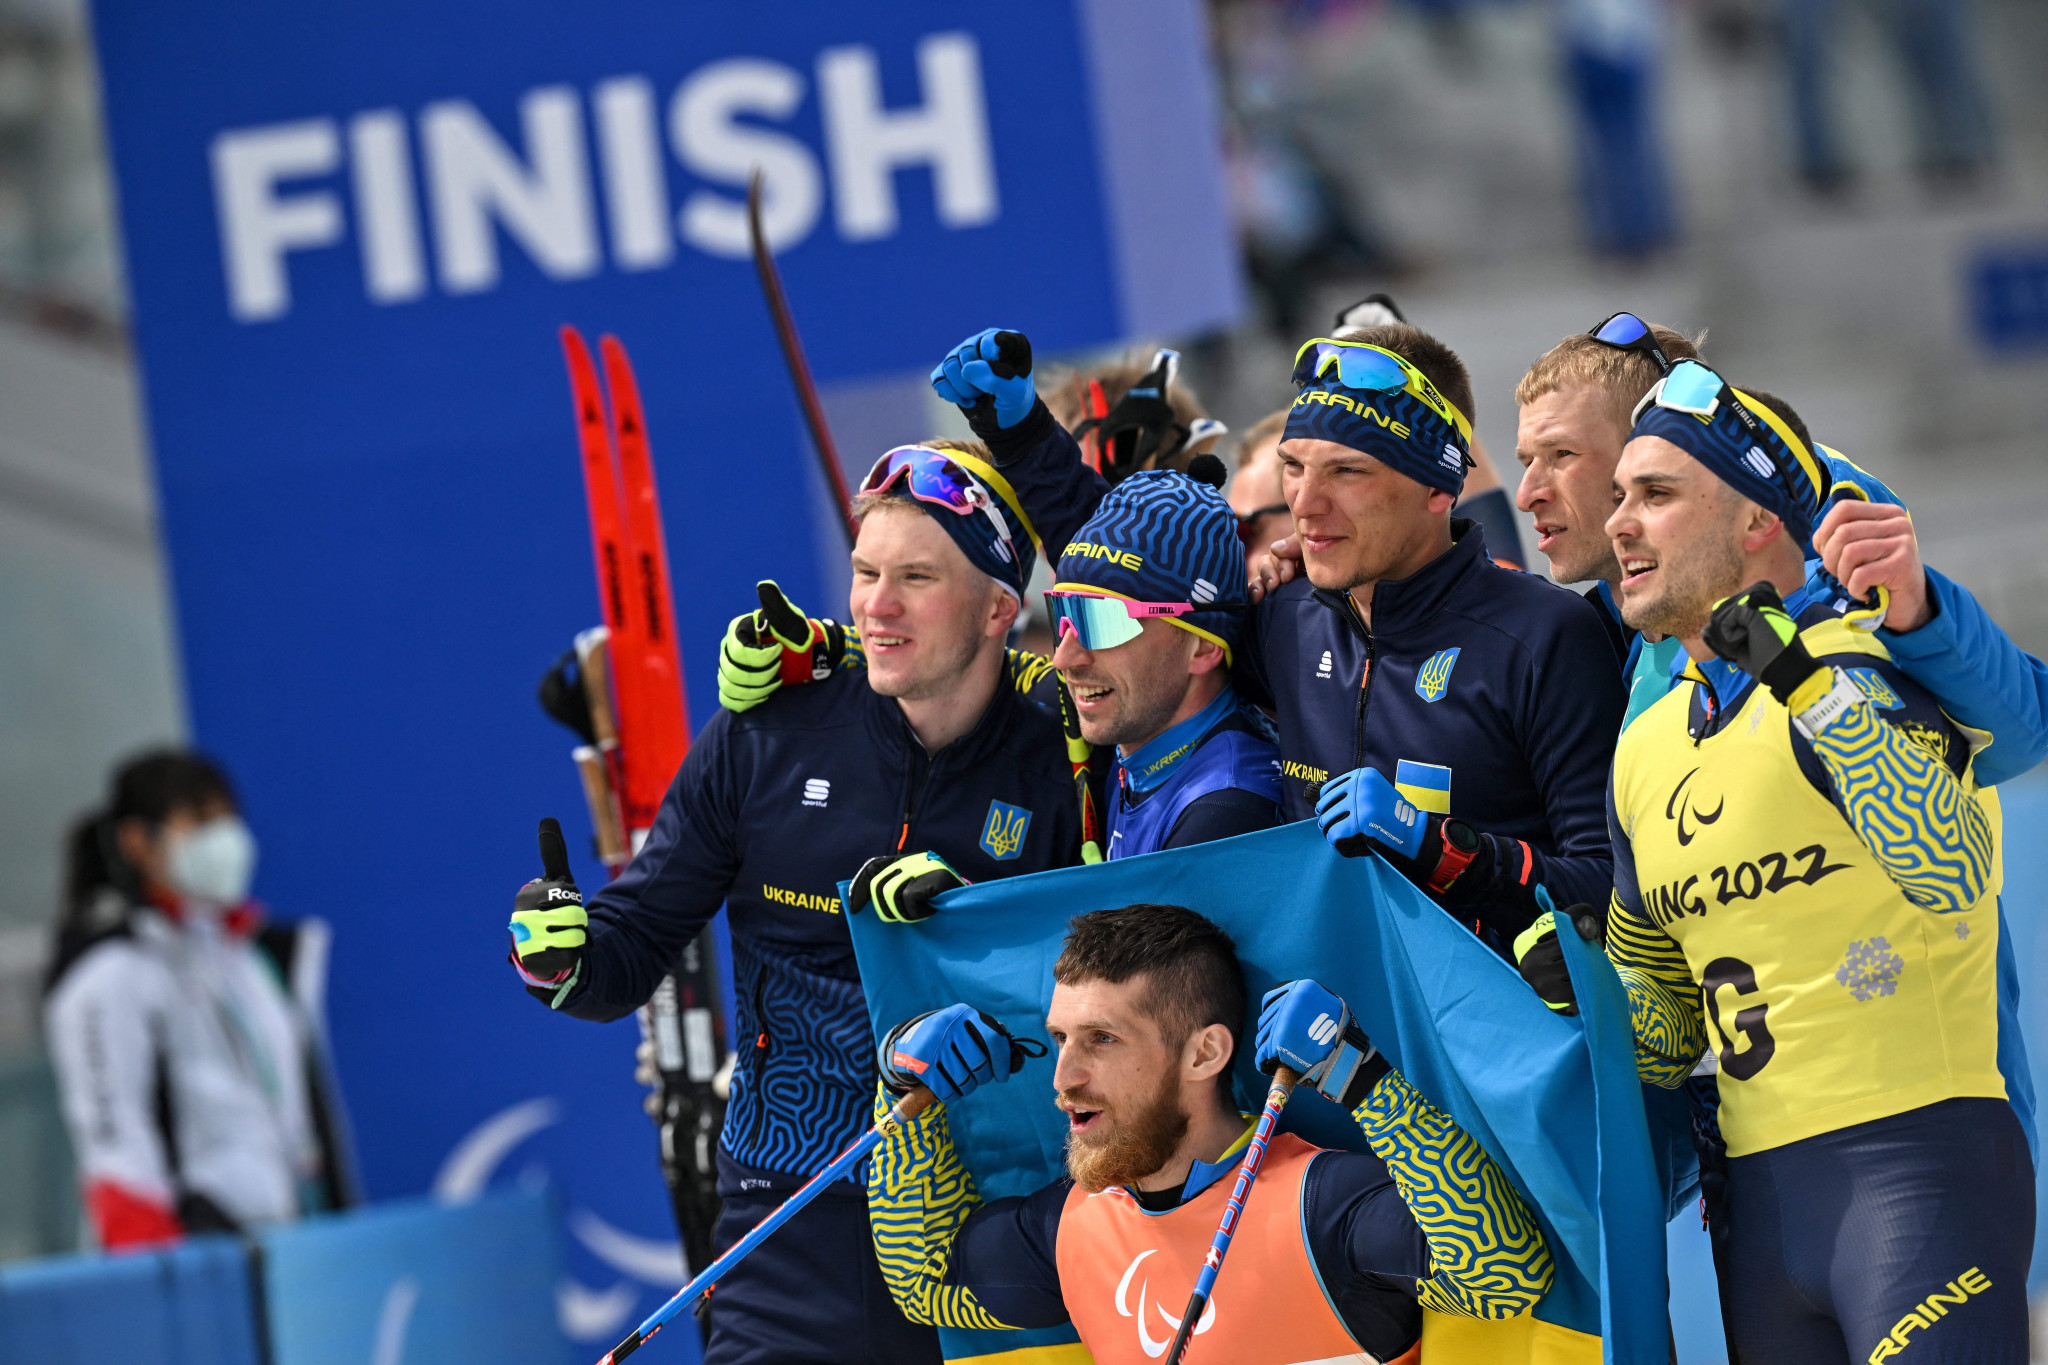 Ukraine Paralympic Committee signs deal with South Korea to offer help to war-torn country after Winter Paralympics success